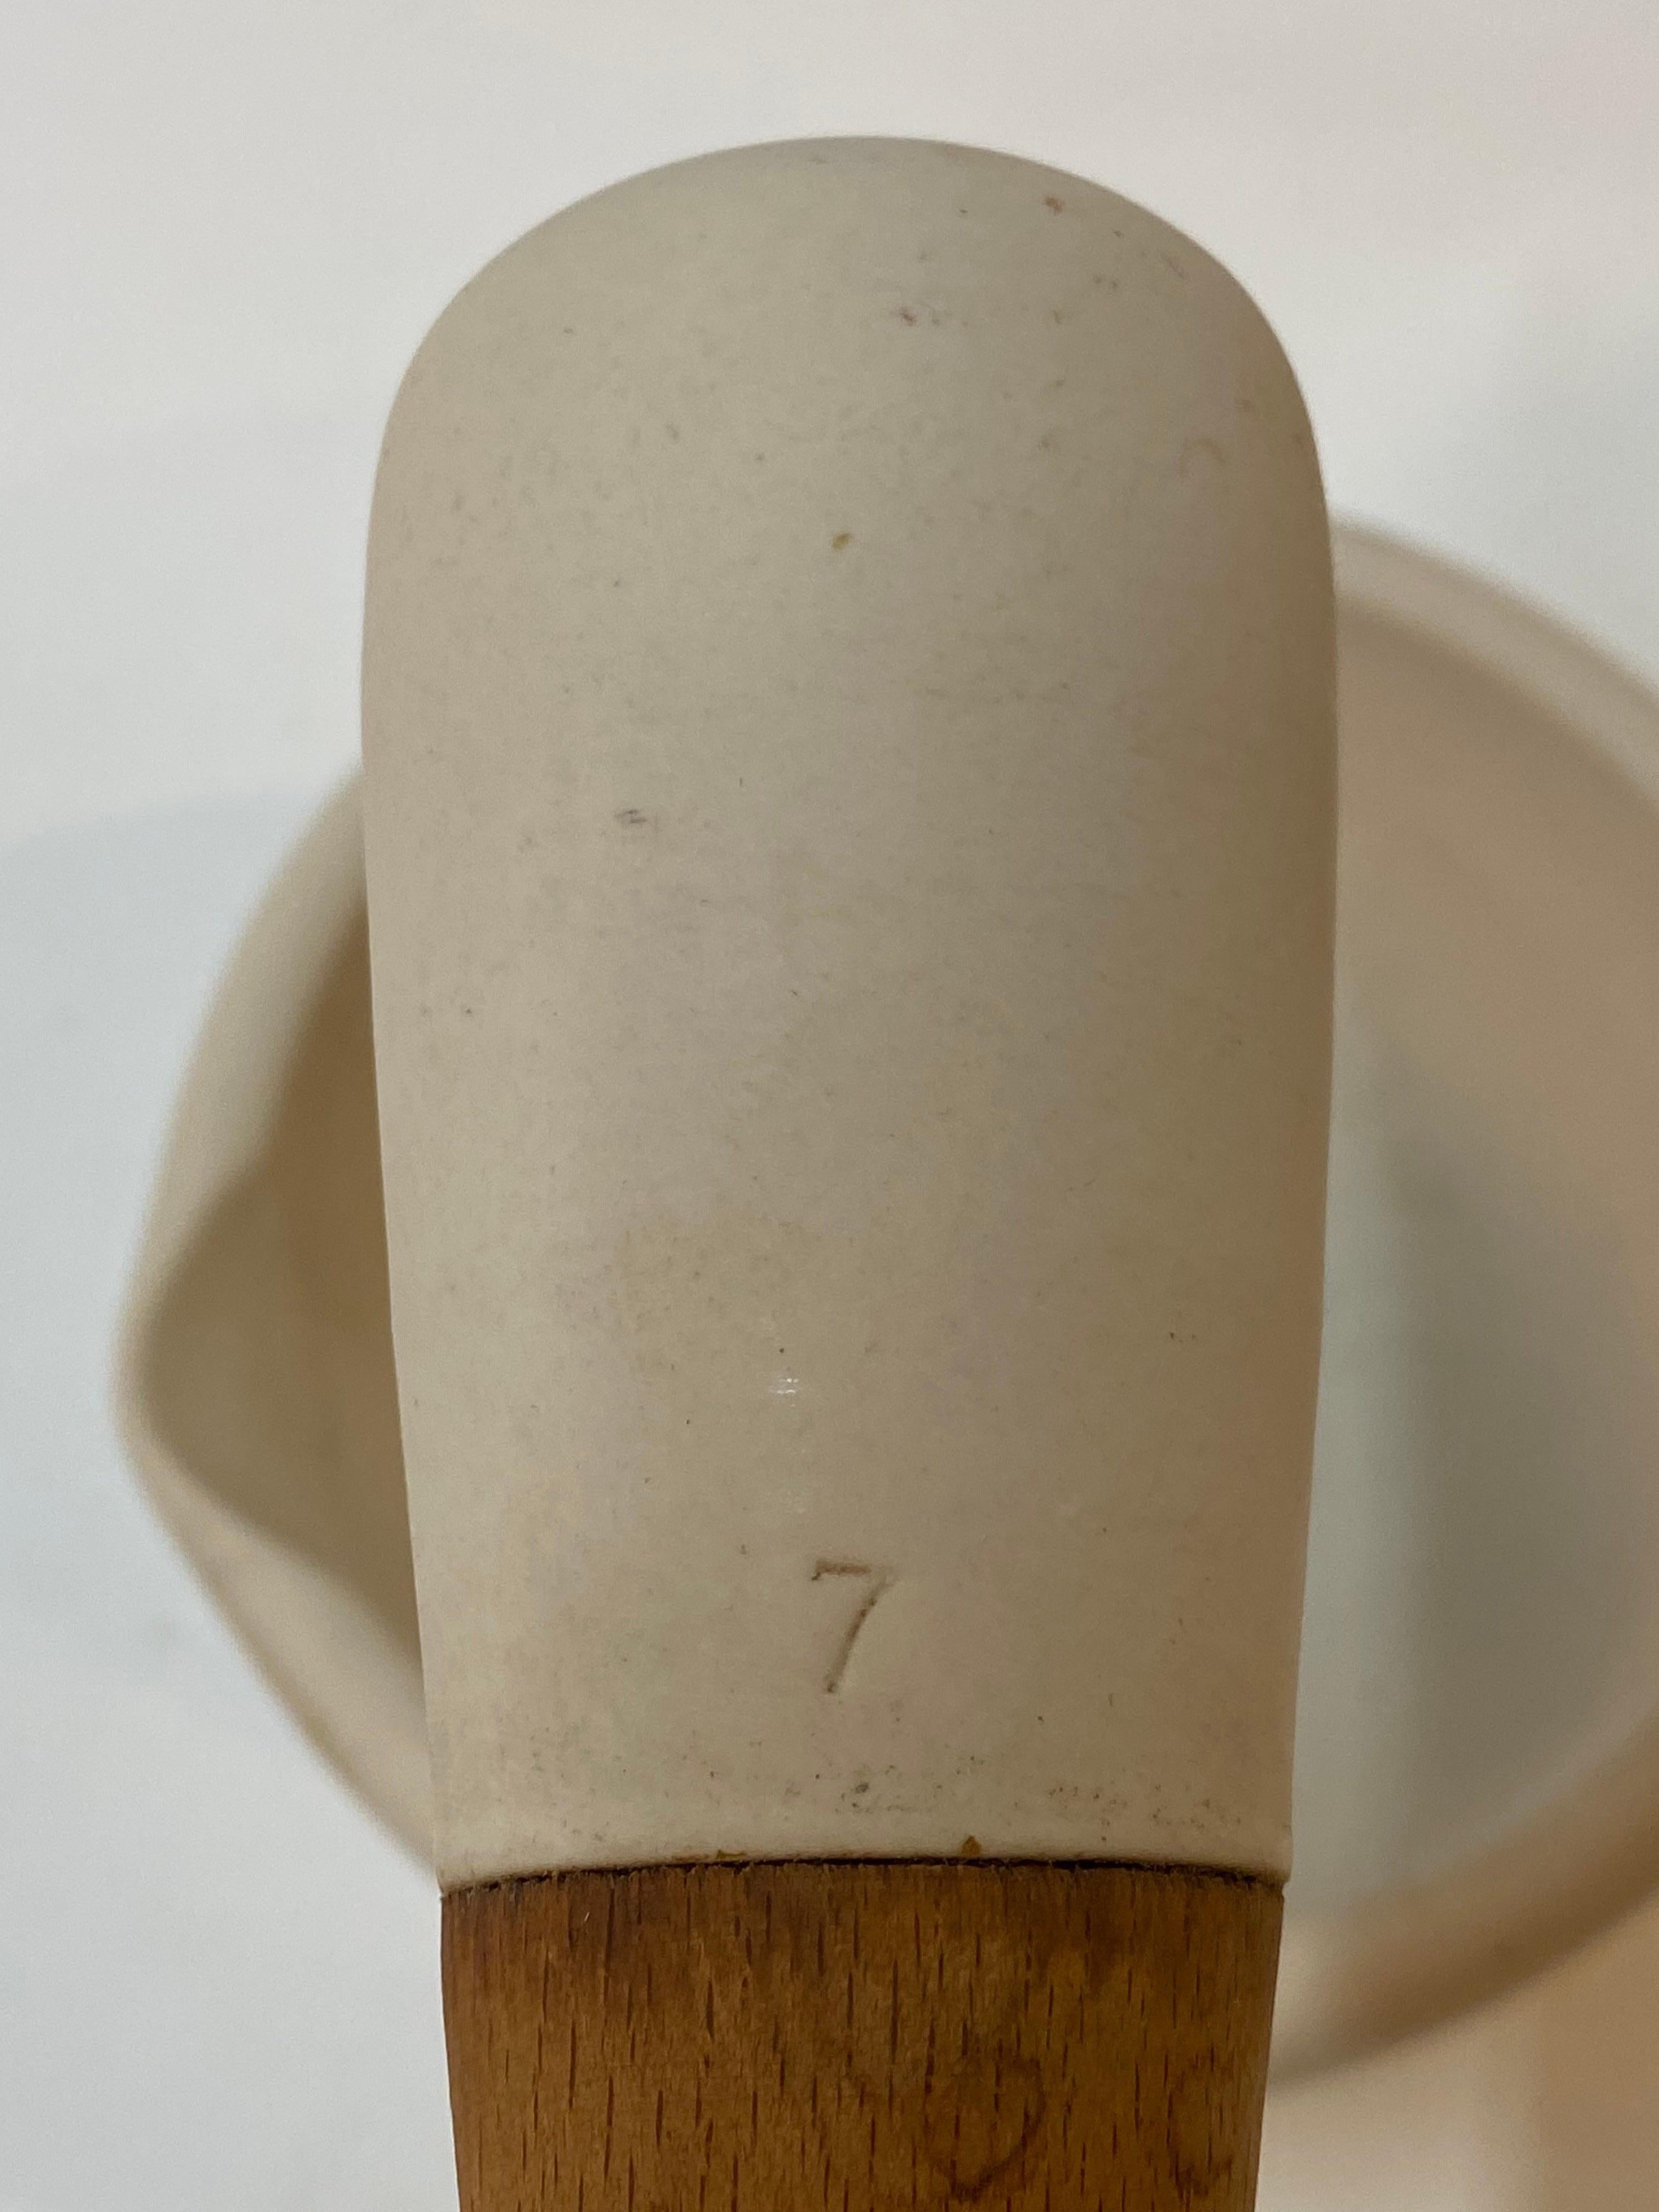 English Porcelain Mortar and Pestle #7 For Sale 2